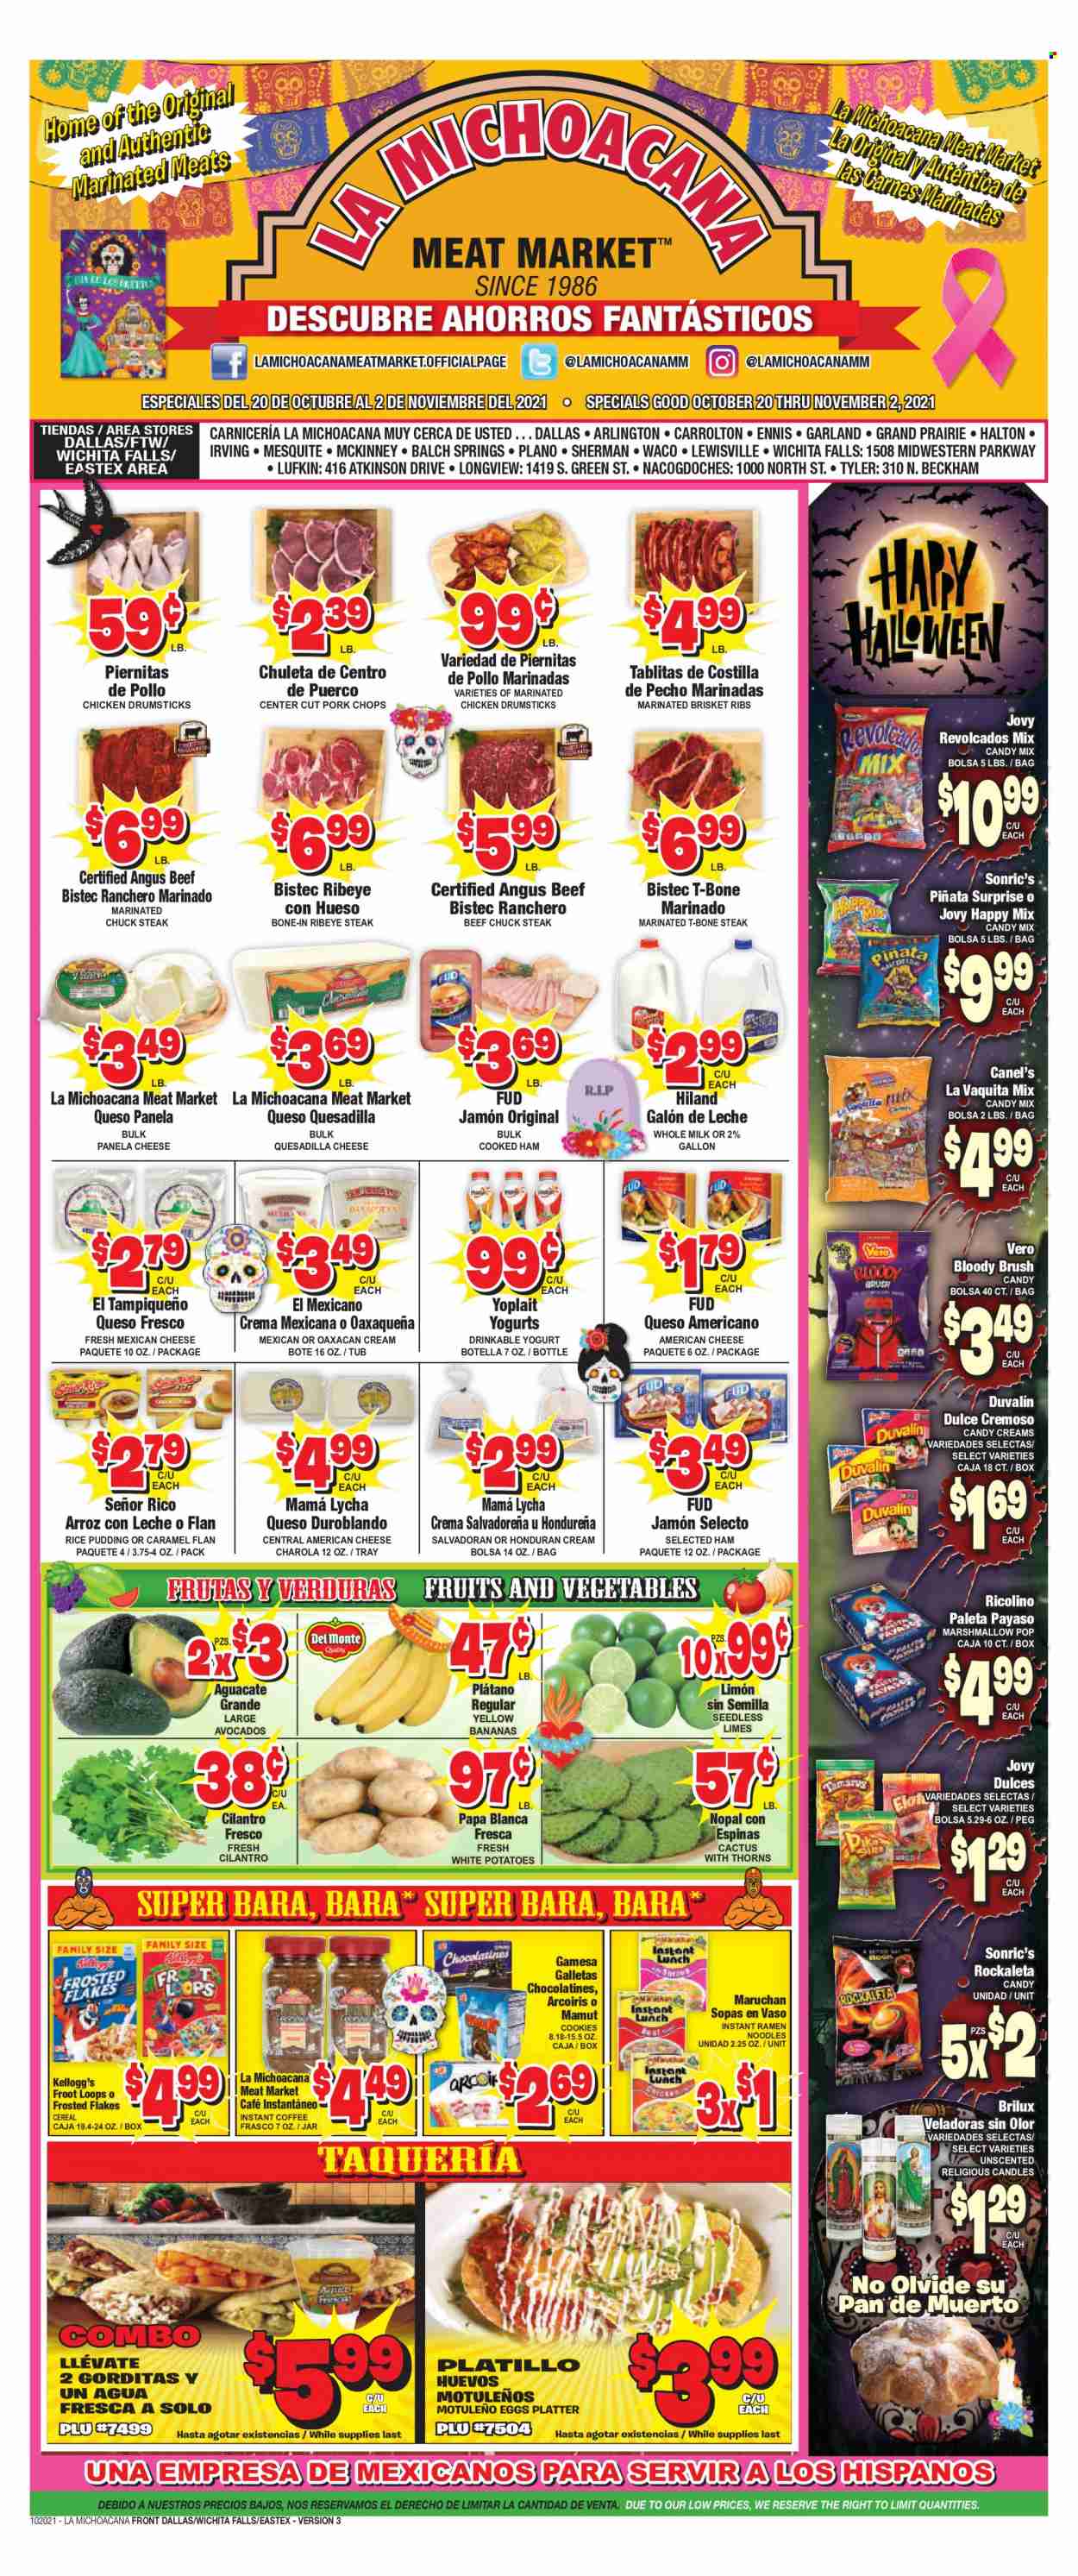 thumbnail - La Michoacana Meat Market Flyer - 10/20/2021 - 11/02/2021 - Sales products - potatoes, avocado, bananas, limes, ramen, noodles, cooked ham, ham, american cheese, queso fresco, cheese, Panela cheese, yoghurt, Yoplait, rice pudding, milk, eggs, cookies, marshmallows, Kellogg's, cereals, Frosted Flakes, cilantro, soft drink, instant coffee, chicken drumsticks, marinated chicken, beef meat, beef steak, t-bone steak, steak, bone-in ribeye, chuck steak, ribeye steak, pork chops, pork meat, brush, pan, candle. Page 1.